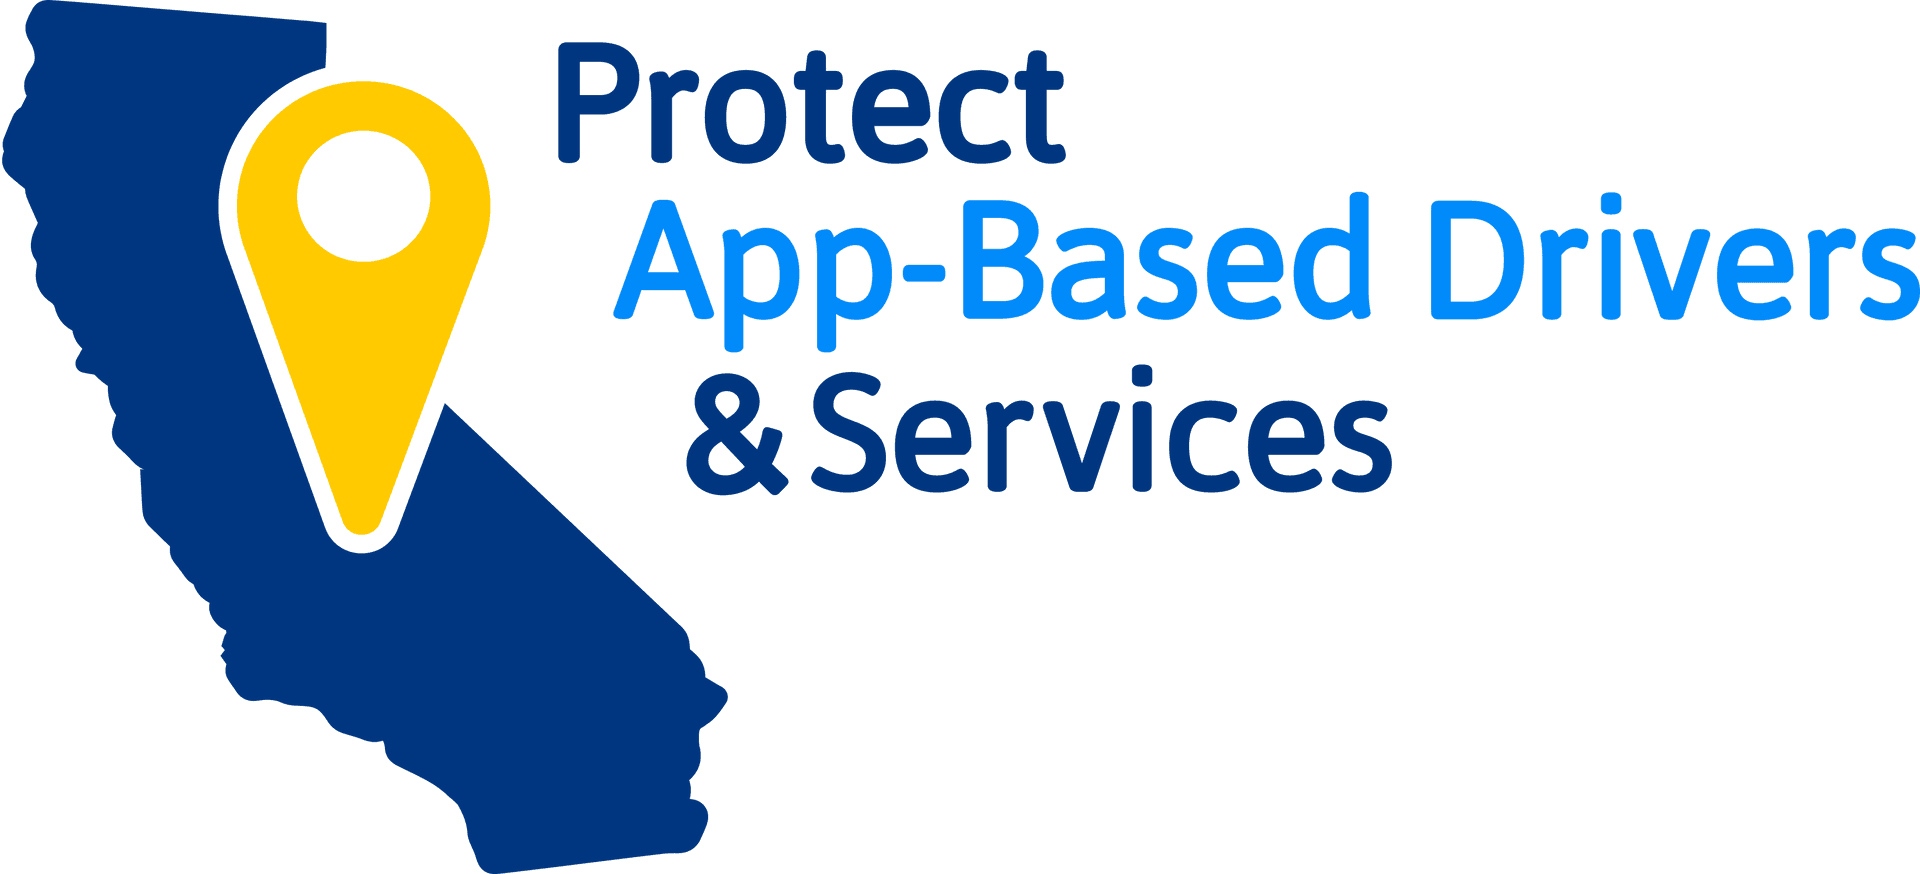 App Based Driver Protection Campaign Logo PNG image